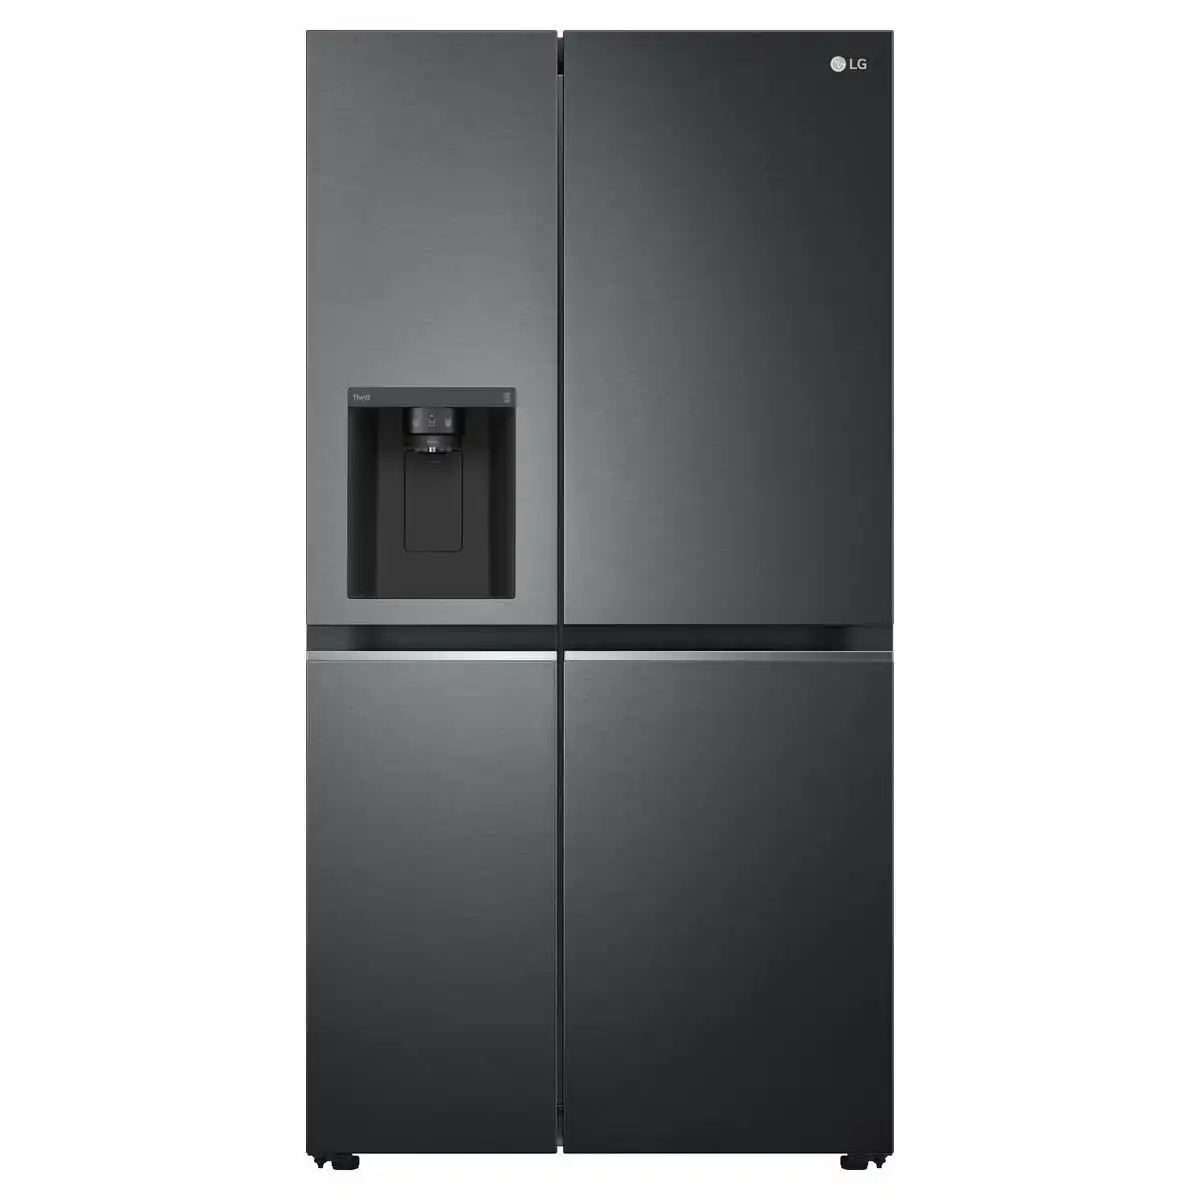 LG 635L Side by Side Non Plumbed Fridge